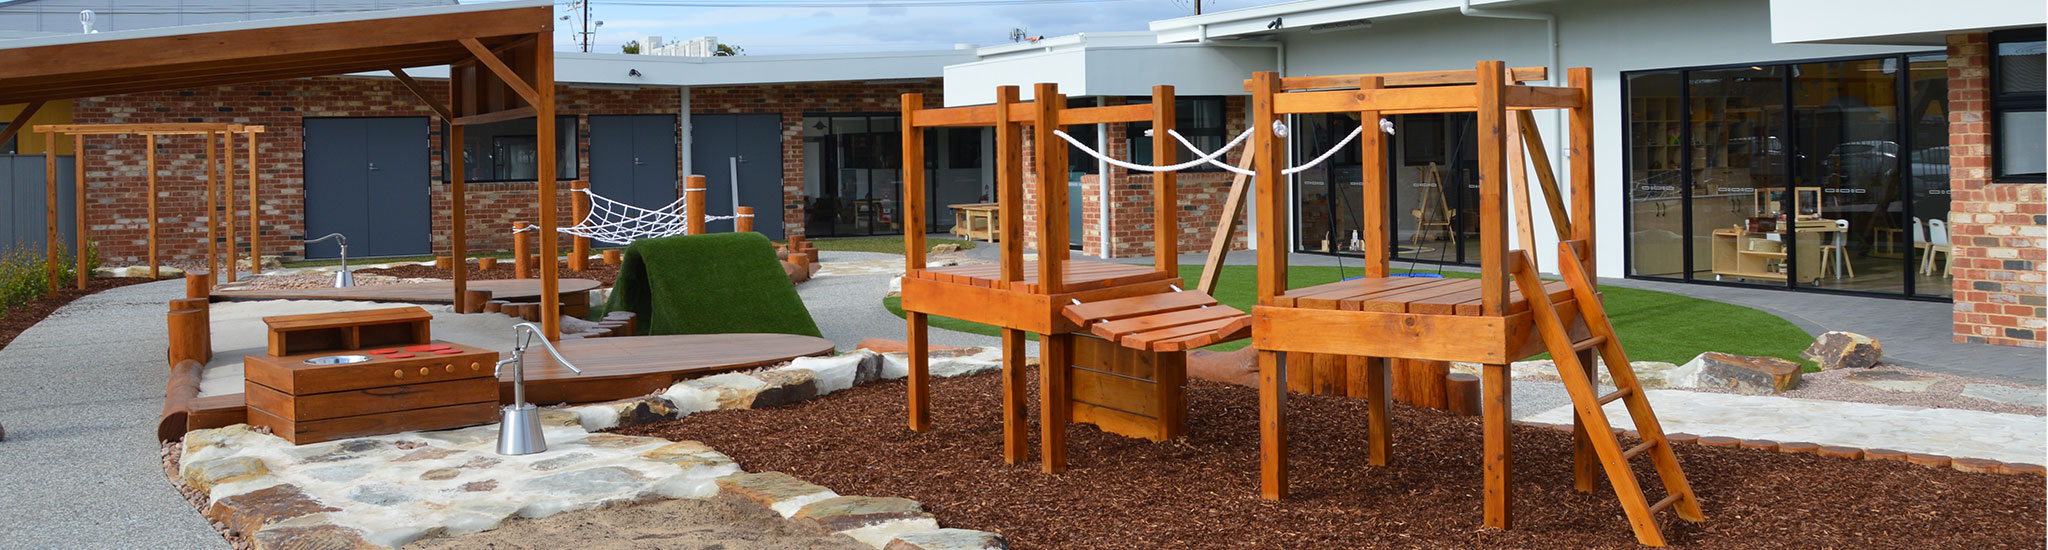 Commercial Landscaping Adelaide | Commercial Landscapers Adelaide | Visual Landscape Gardening